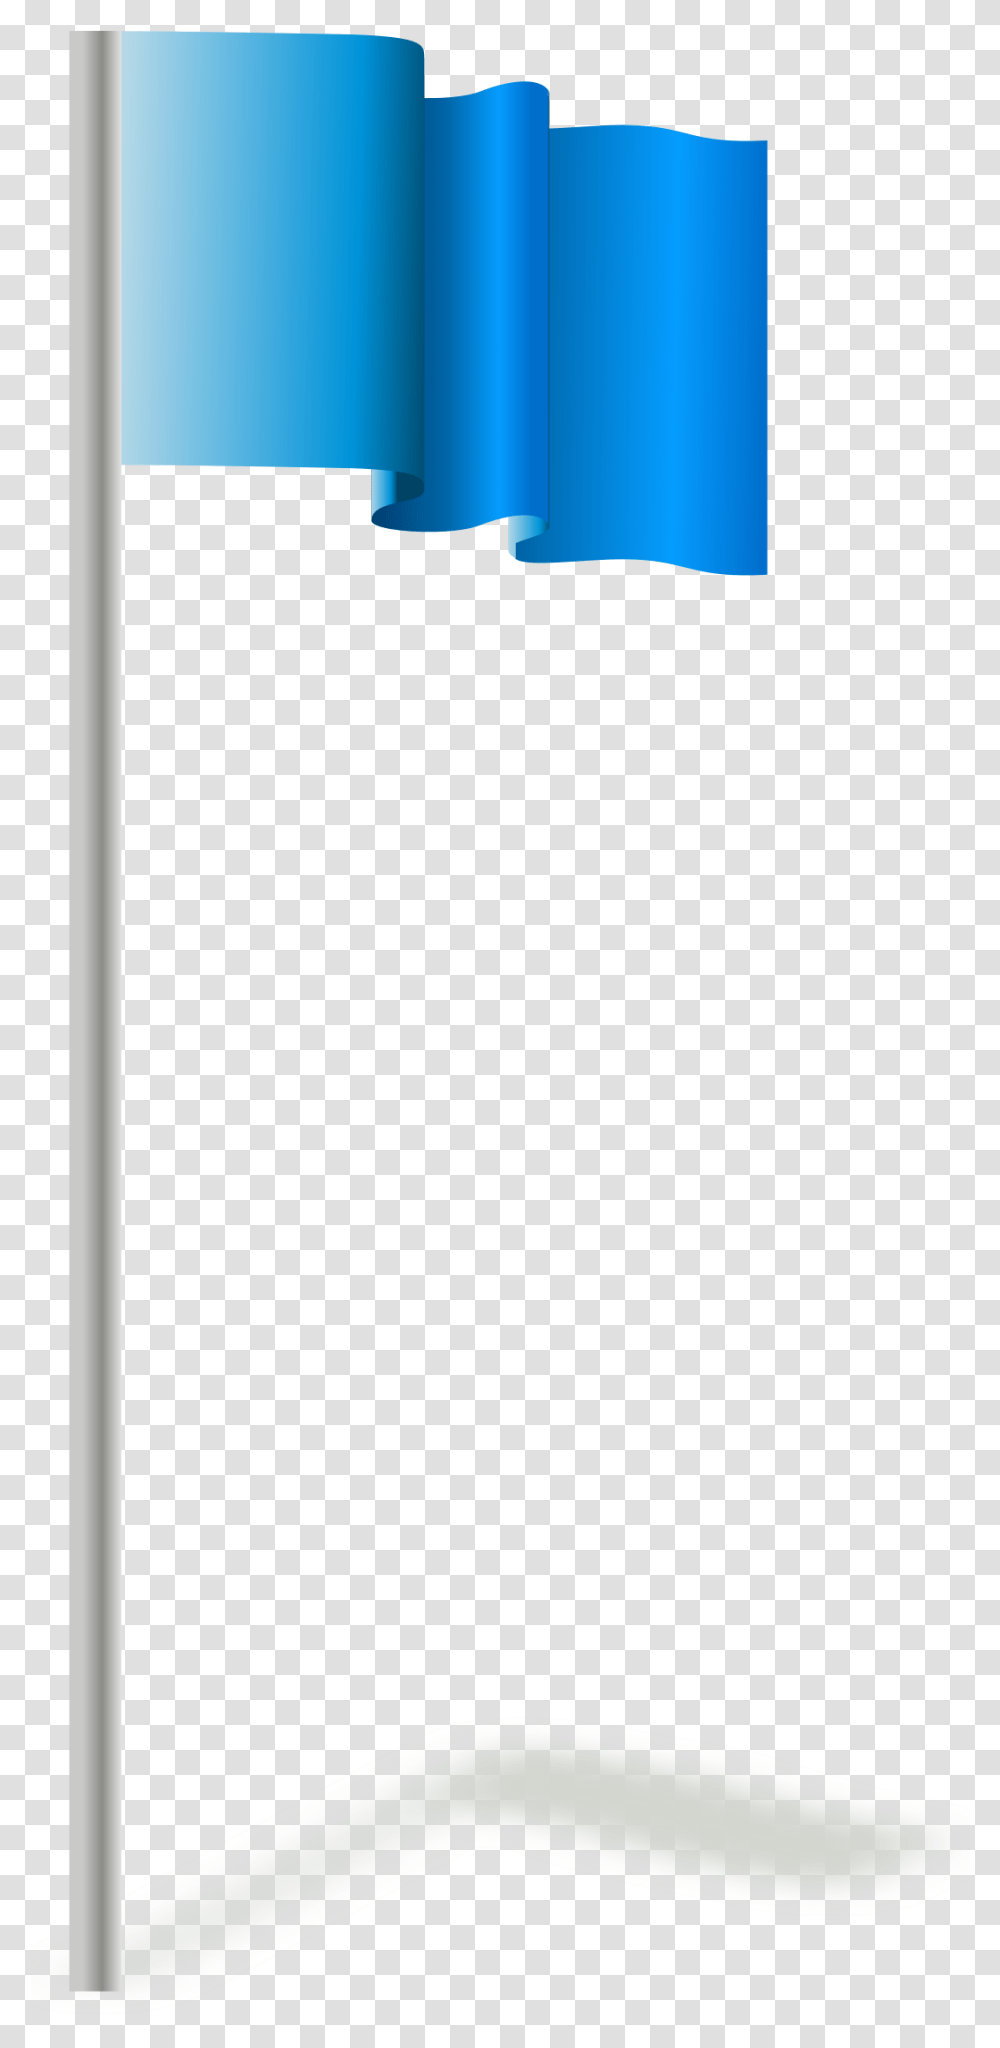 Flagpole Clip Arts Clipart Flag Pole, Electronics, Phone, Mobile Phone, Cell Phone Transparent Png